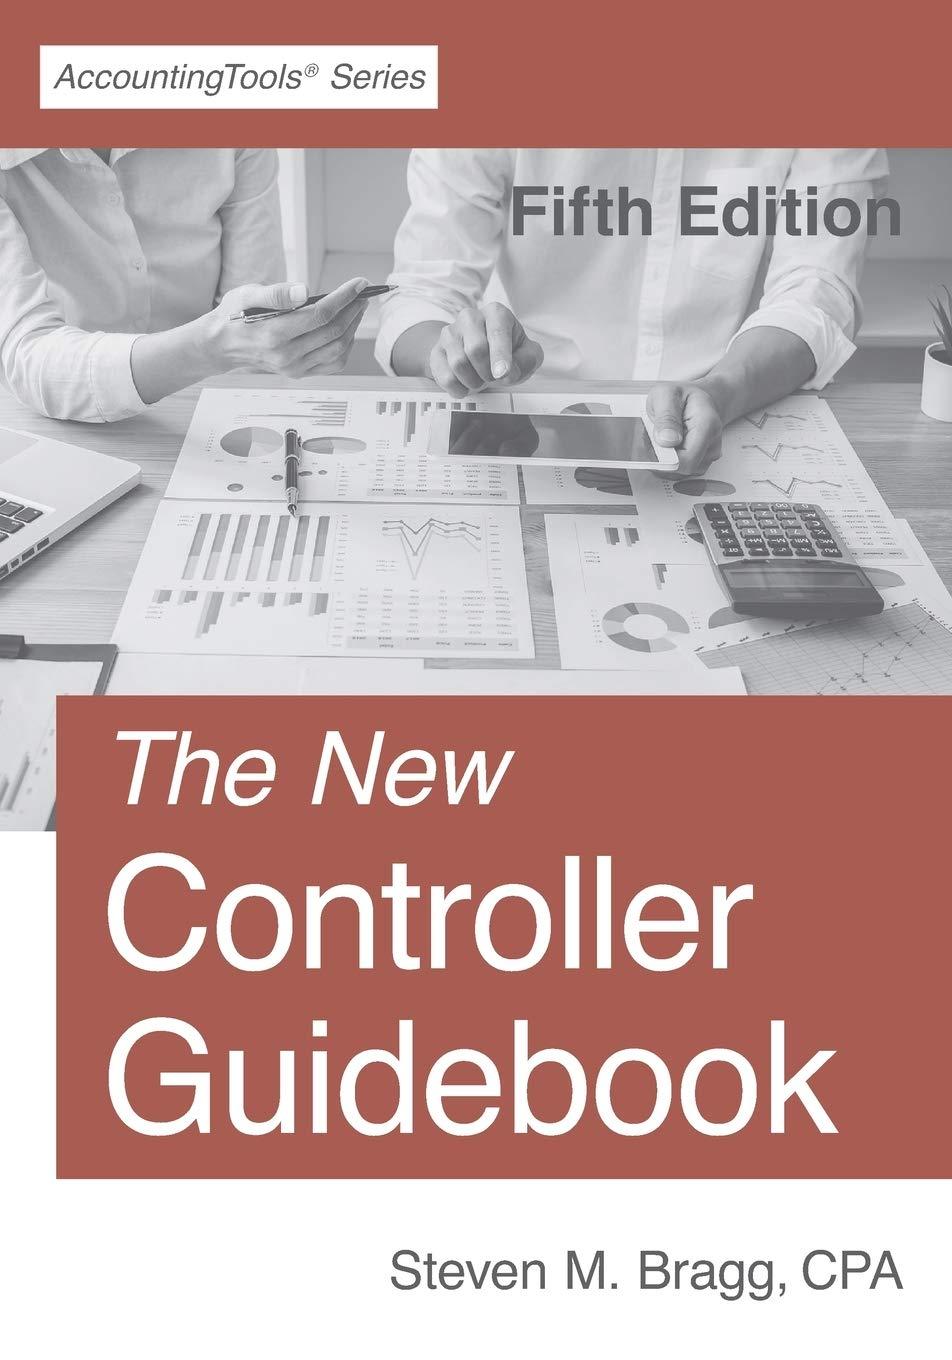 the new controller guidebook 5th edition steven m. bragg 1642210420, 978-1642210422